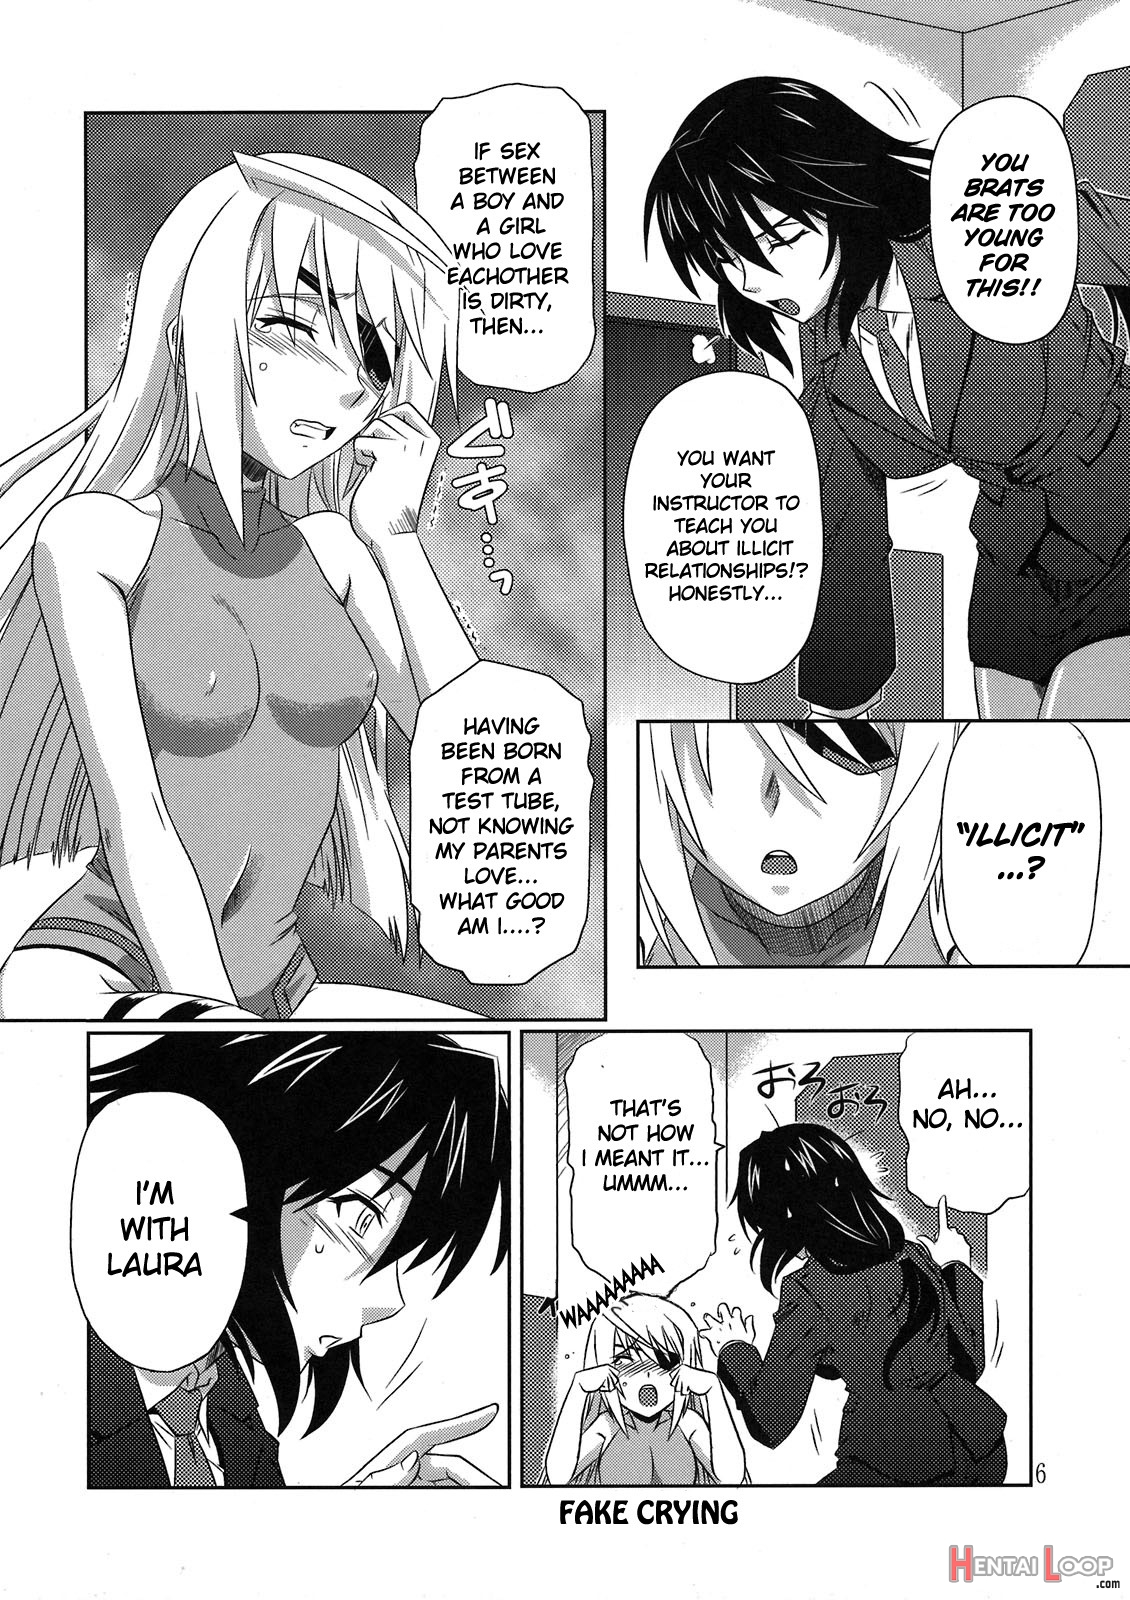 Incest Strategy page 6